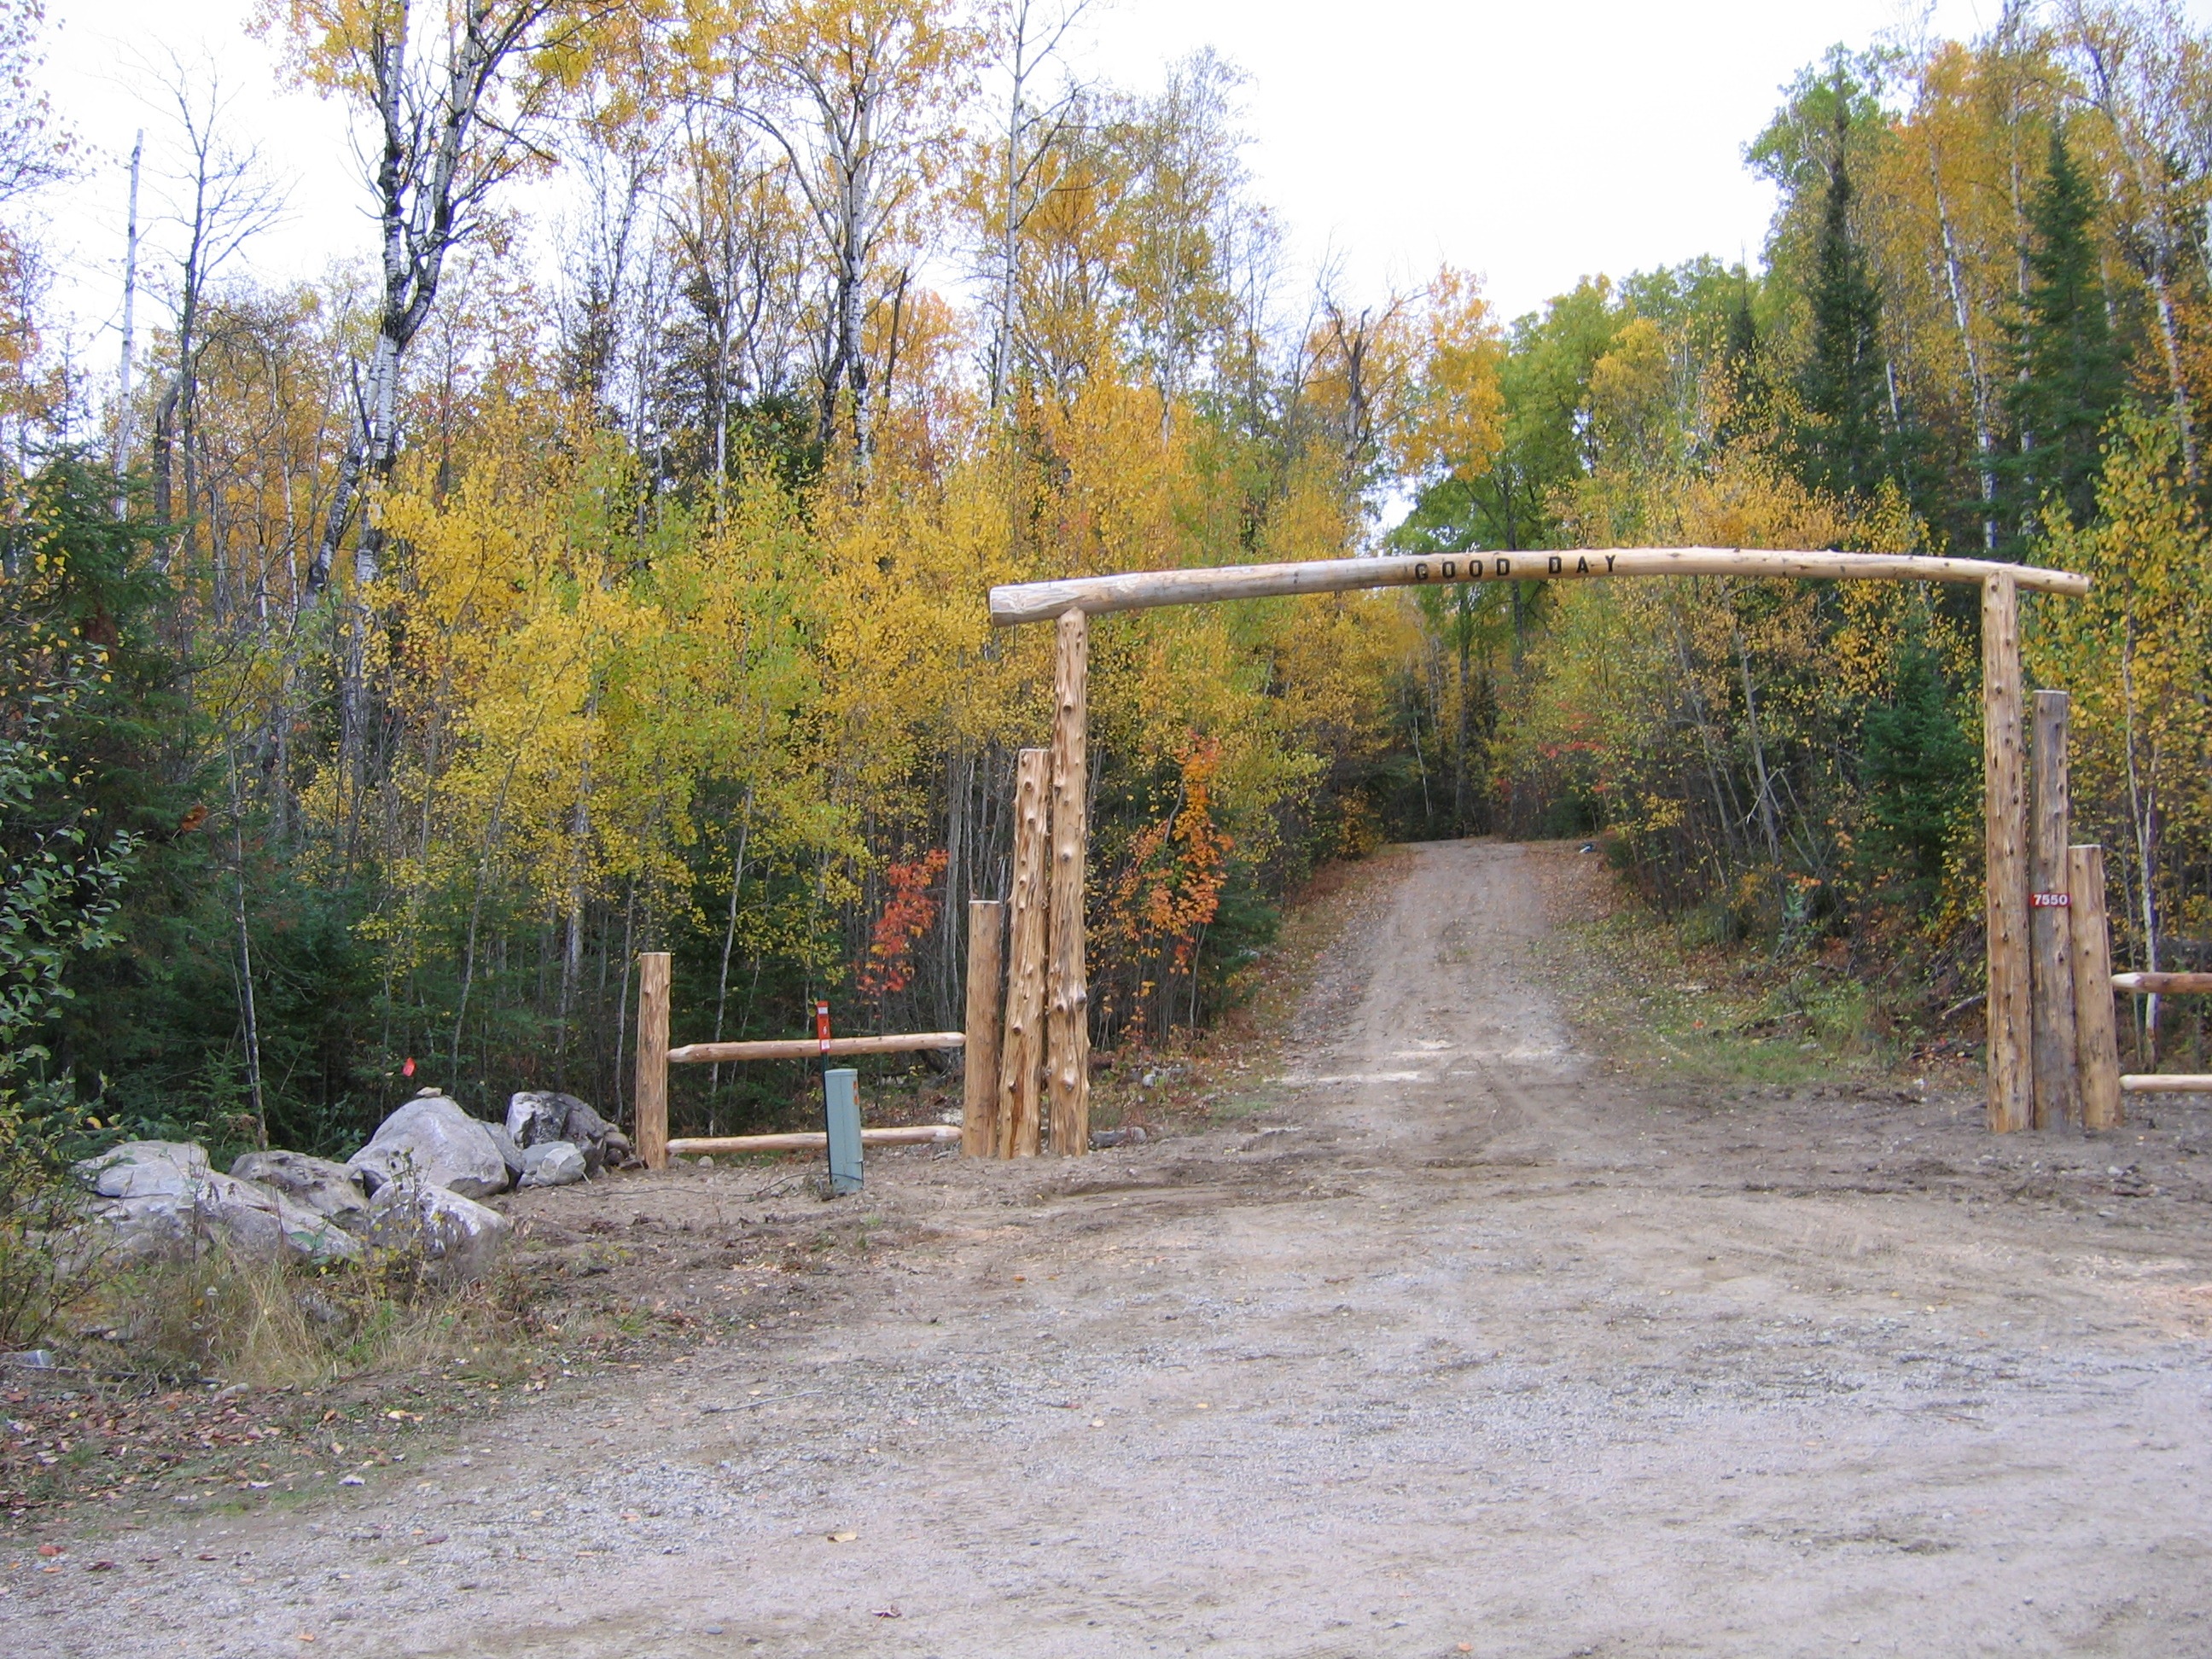 trusses | Driveway timber arch and fence